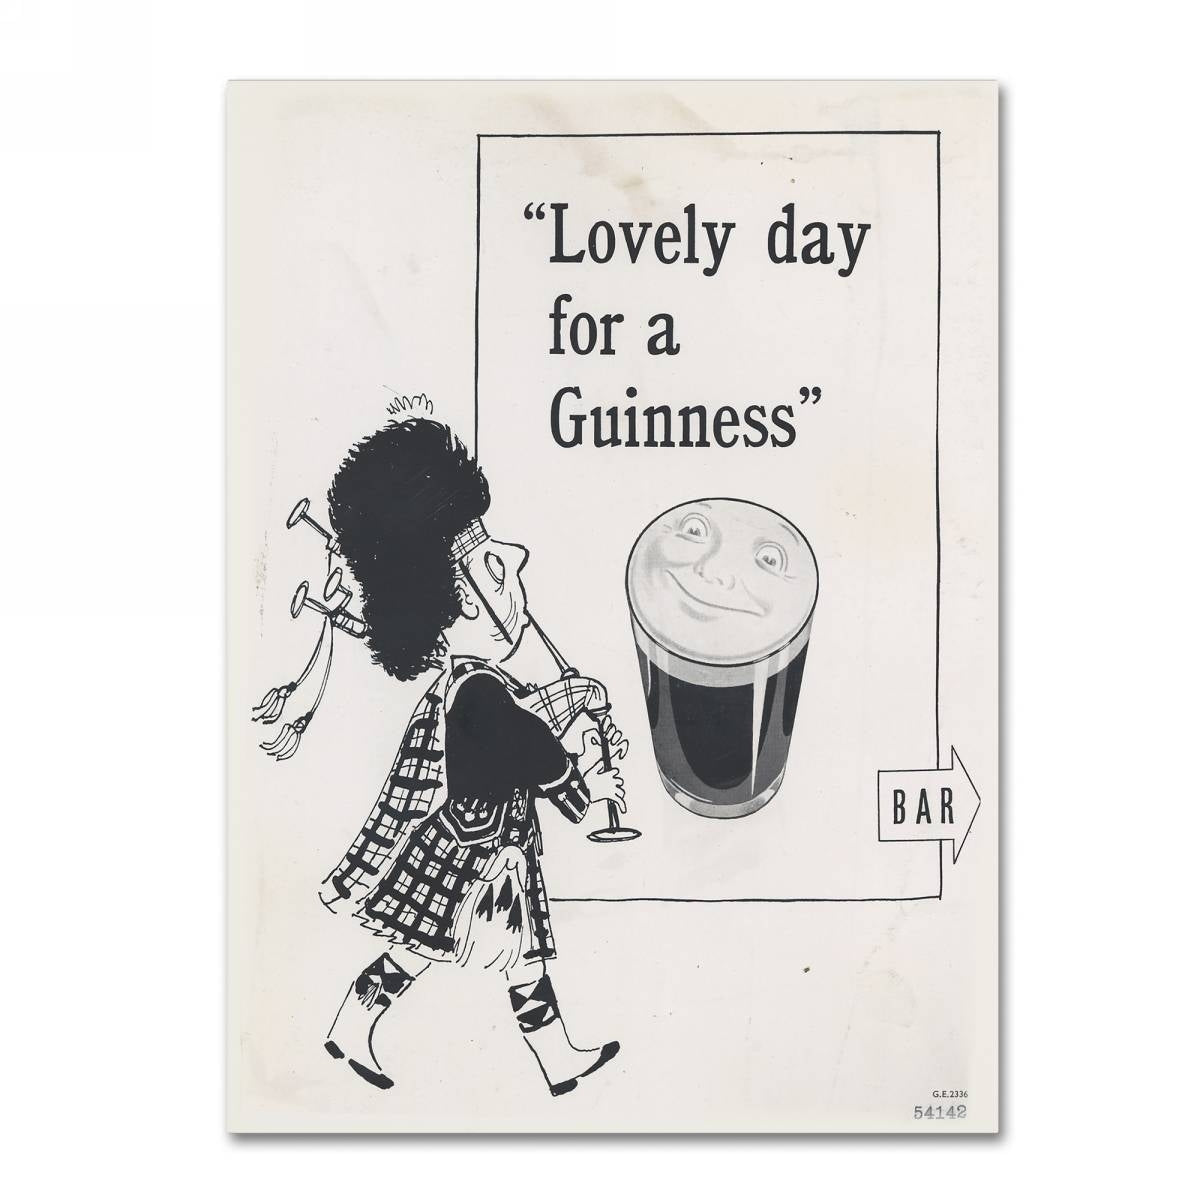 Four GUINNESS HERITAGE My Goodness My Guinness Lovely Day 